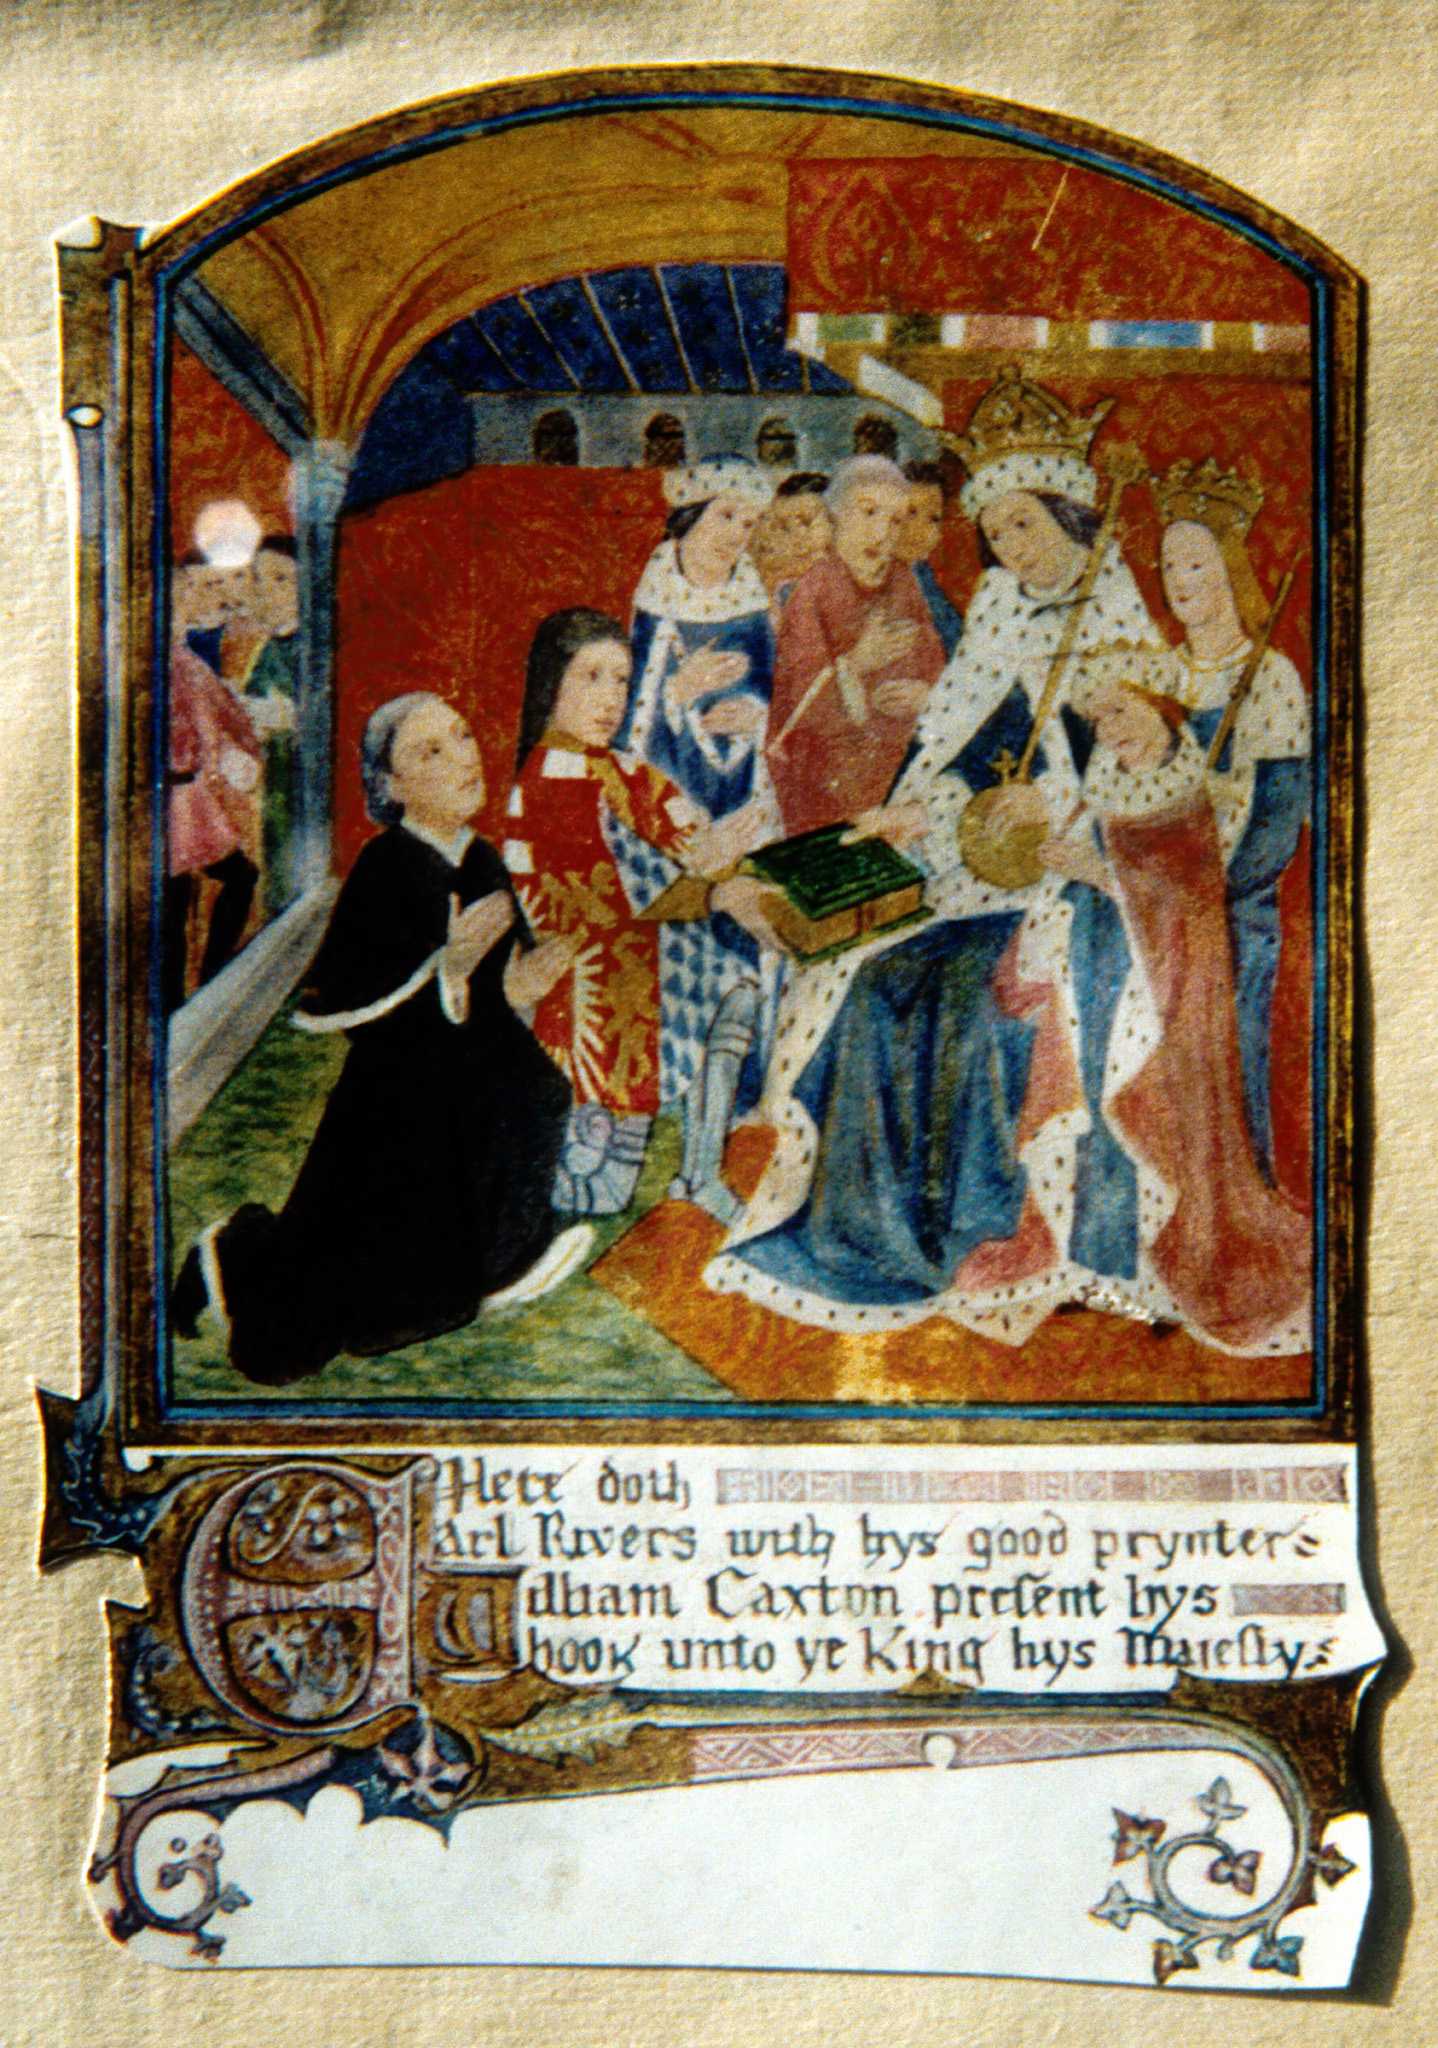 Illustration of royal subjects showing allegiance to nobles and the crown